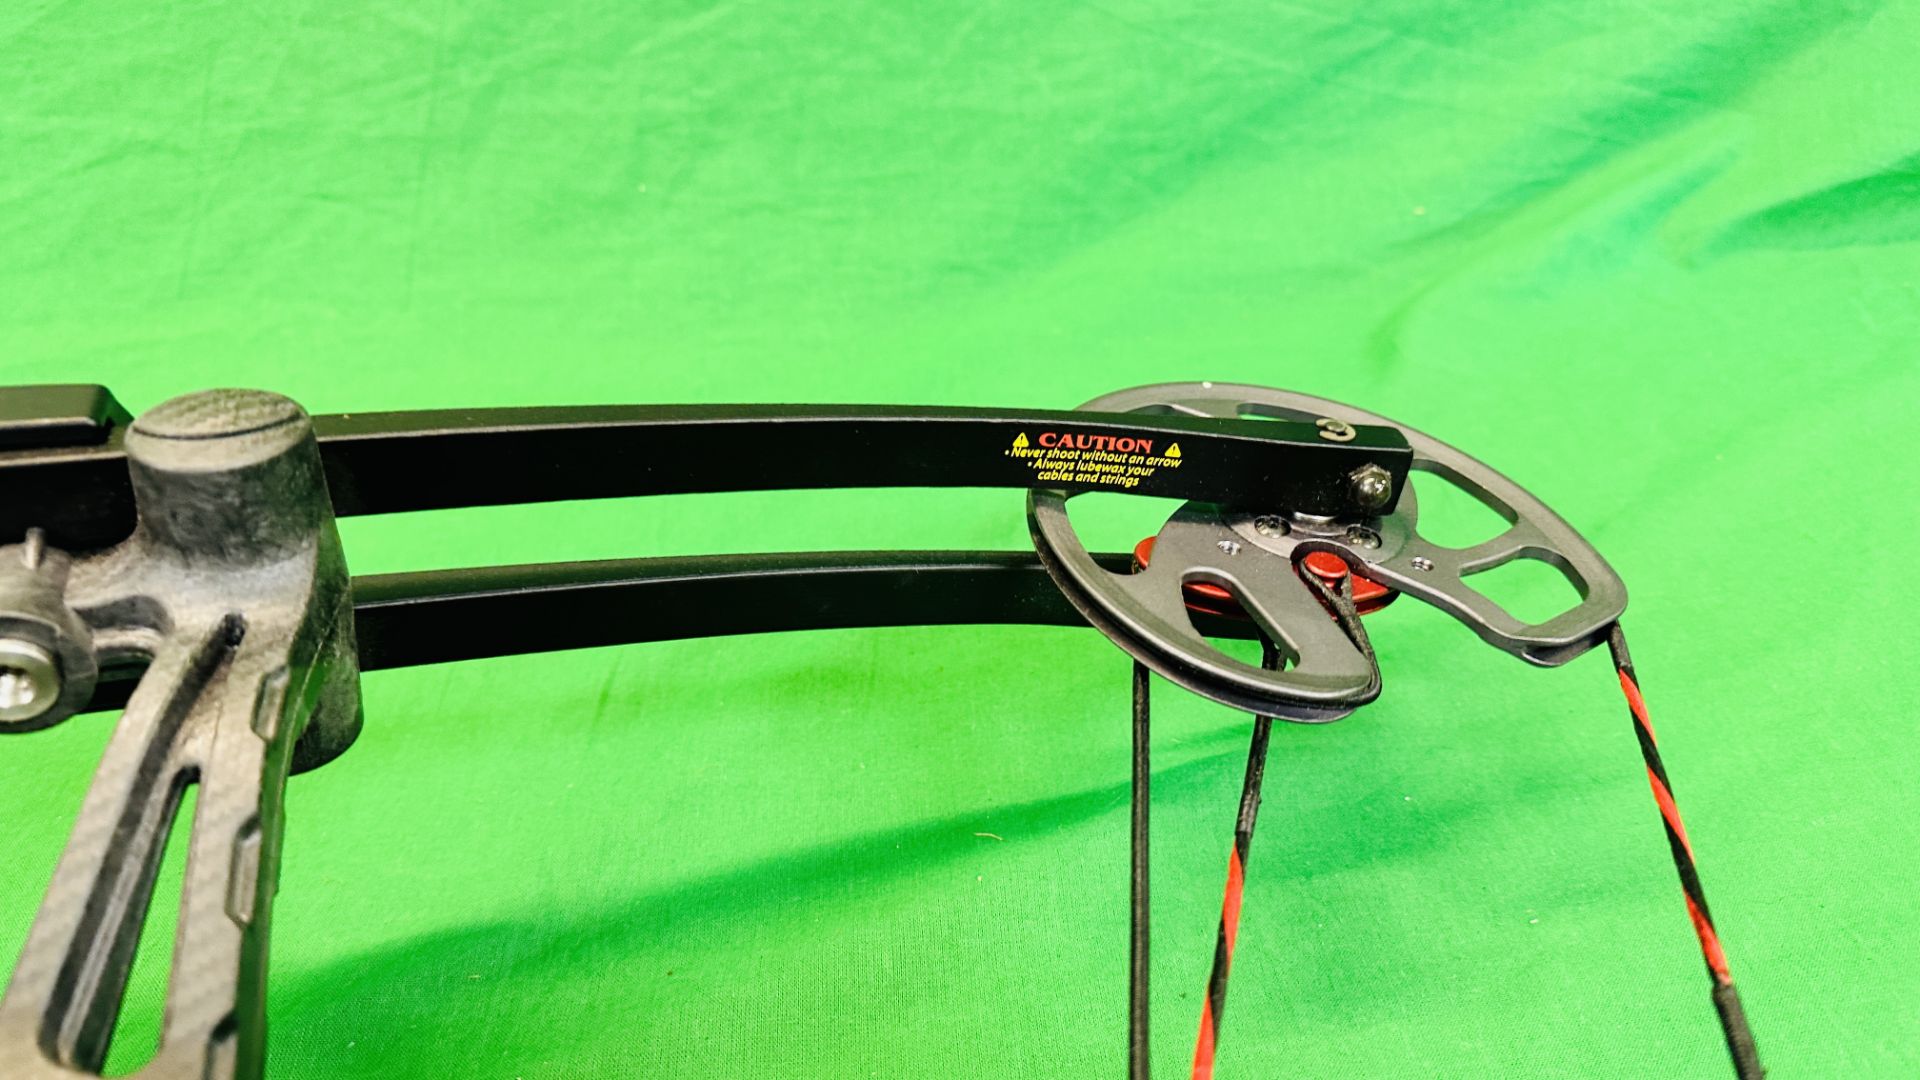 BARNETT "VENGANCE" COMPOUND CROSSBOW COMPLETE WITH THREE CARBON FIBRE CROSSBOW BOLTS, QUIVER, - Image 10 of 35